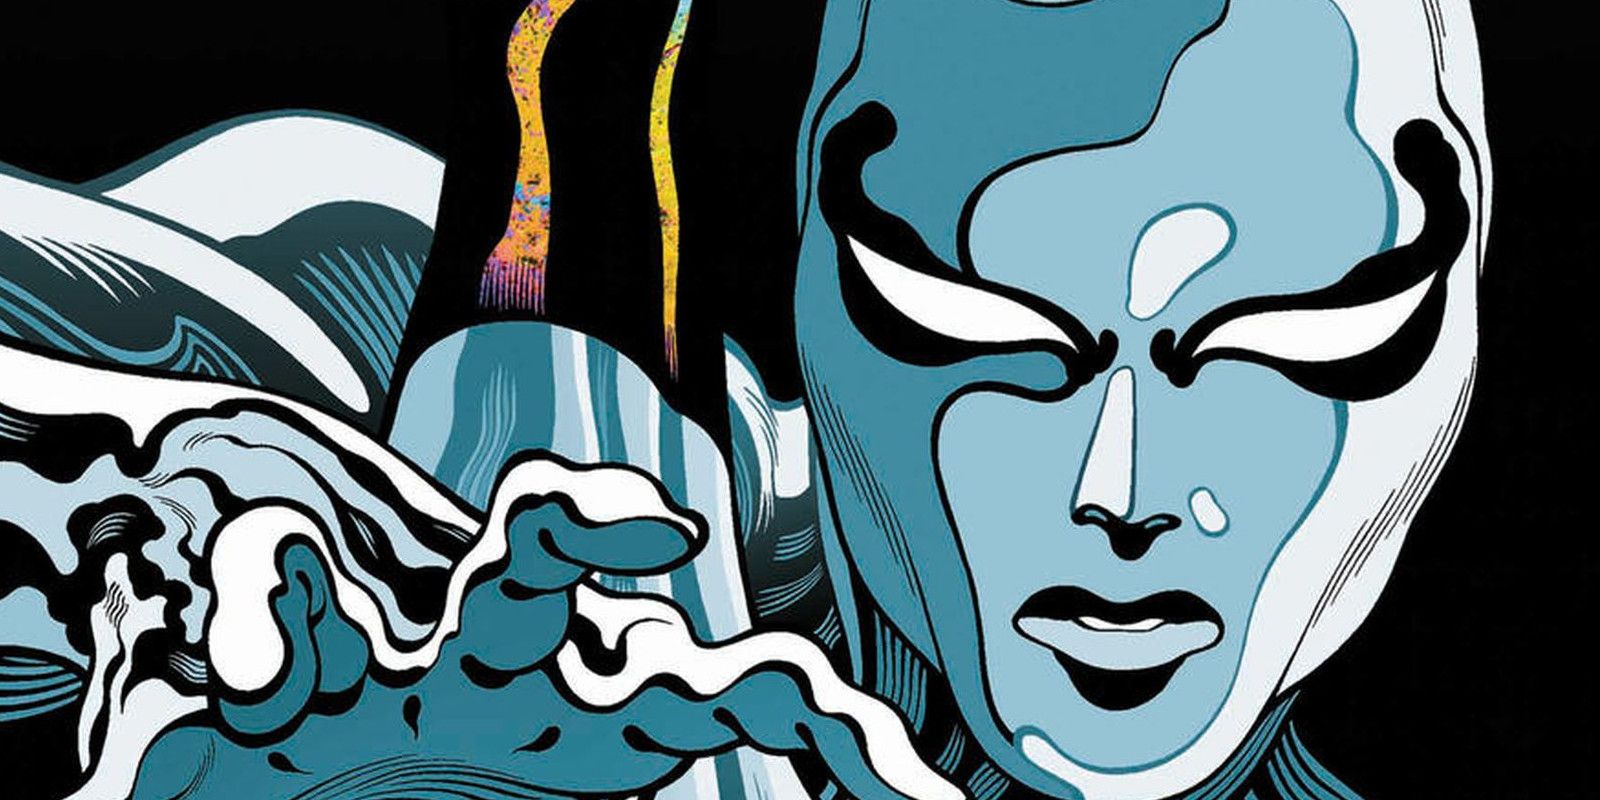 Silver Surfer as he appeared in the comics